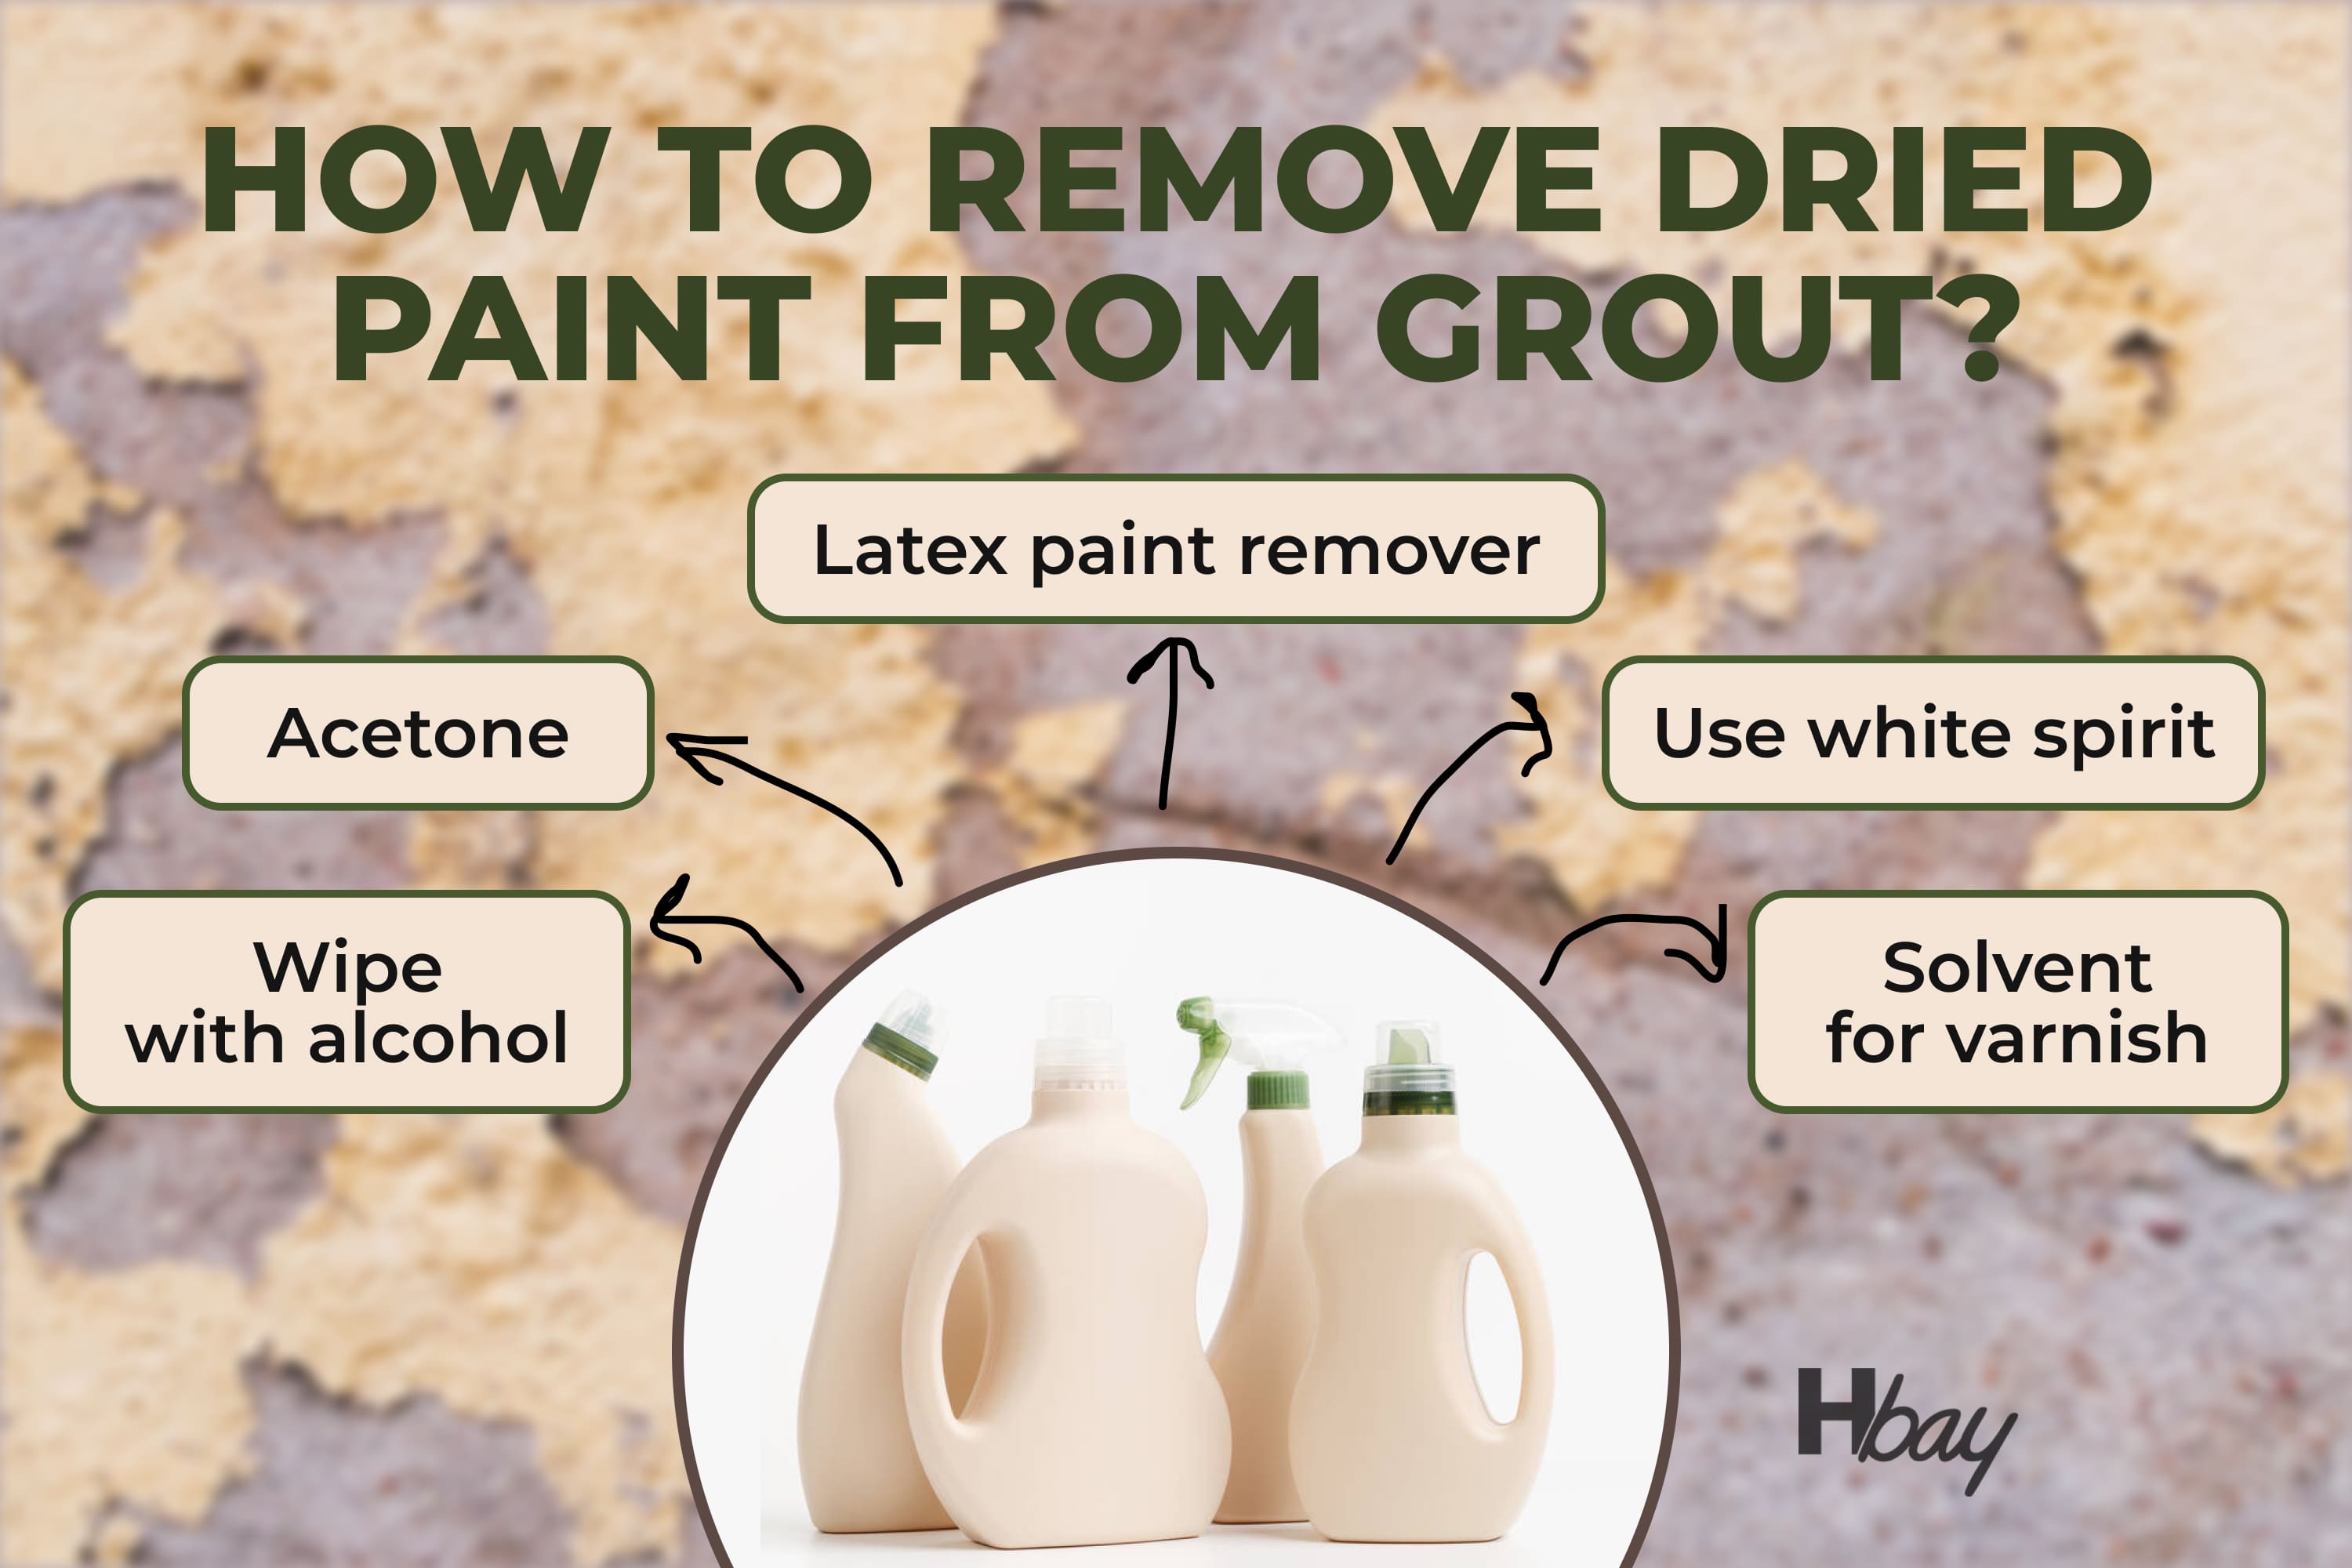 How to Remove Dried Paint From Grout